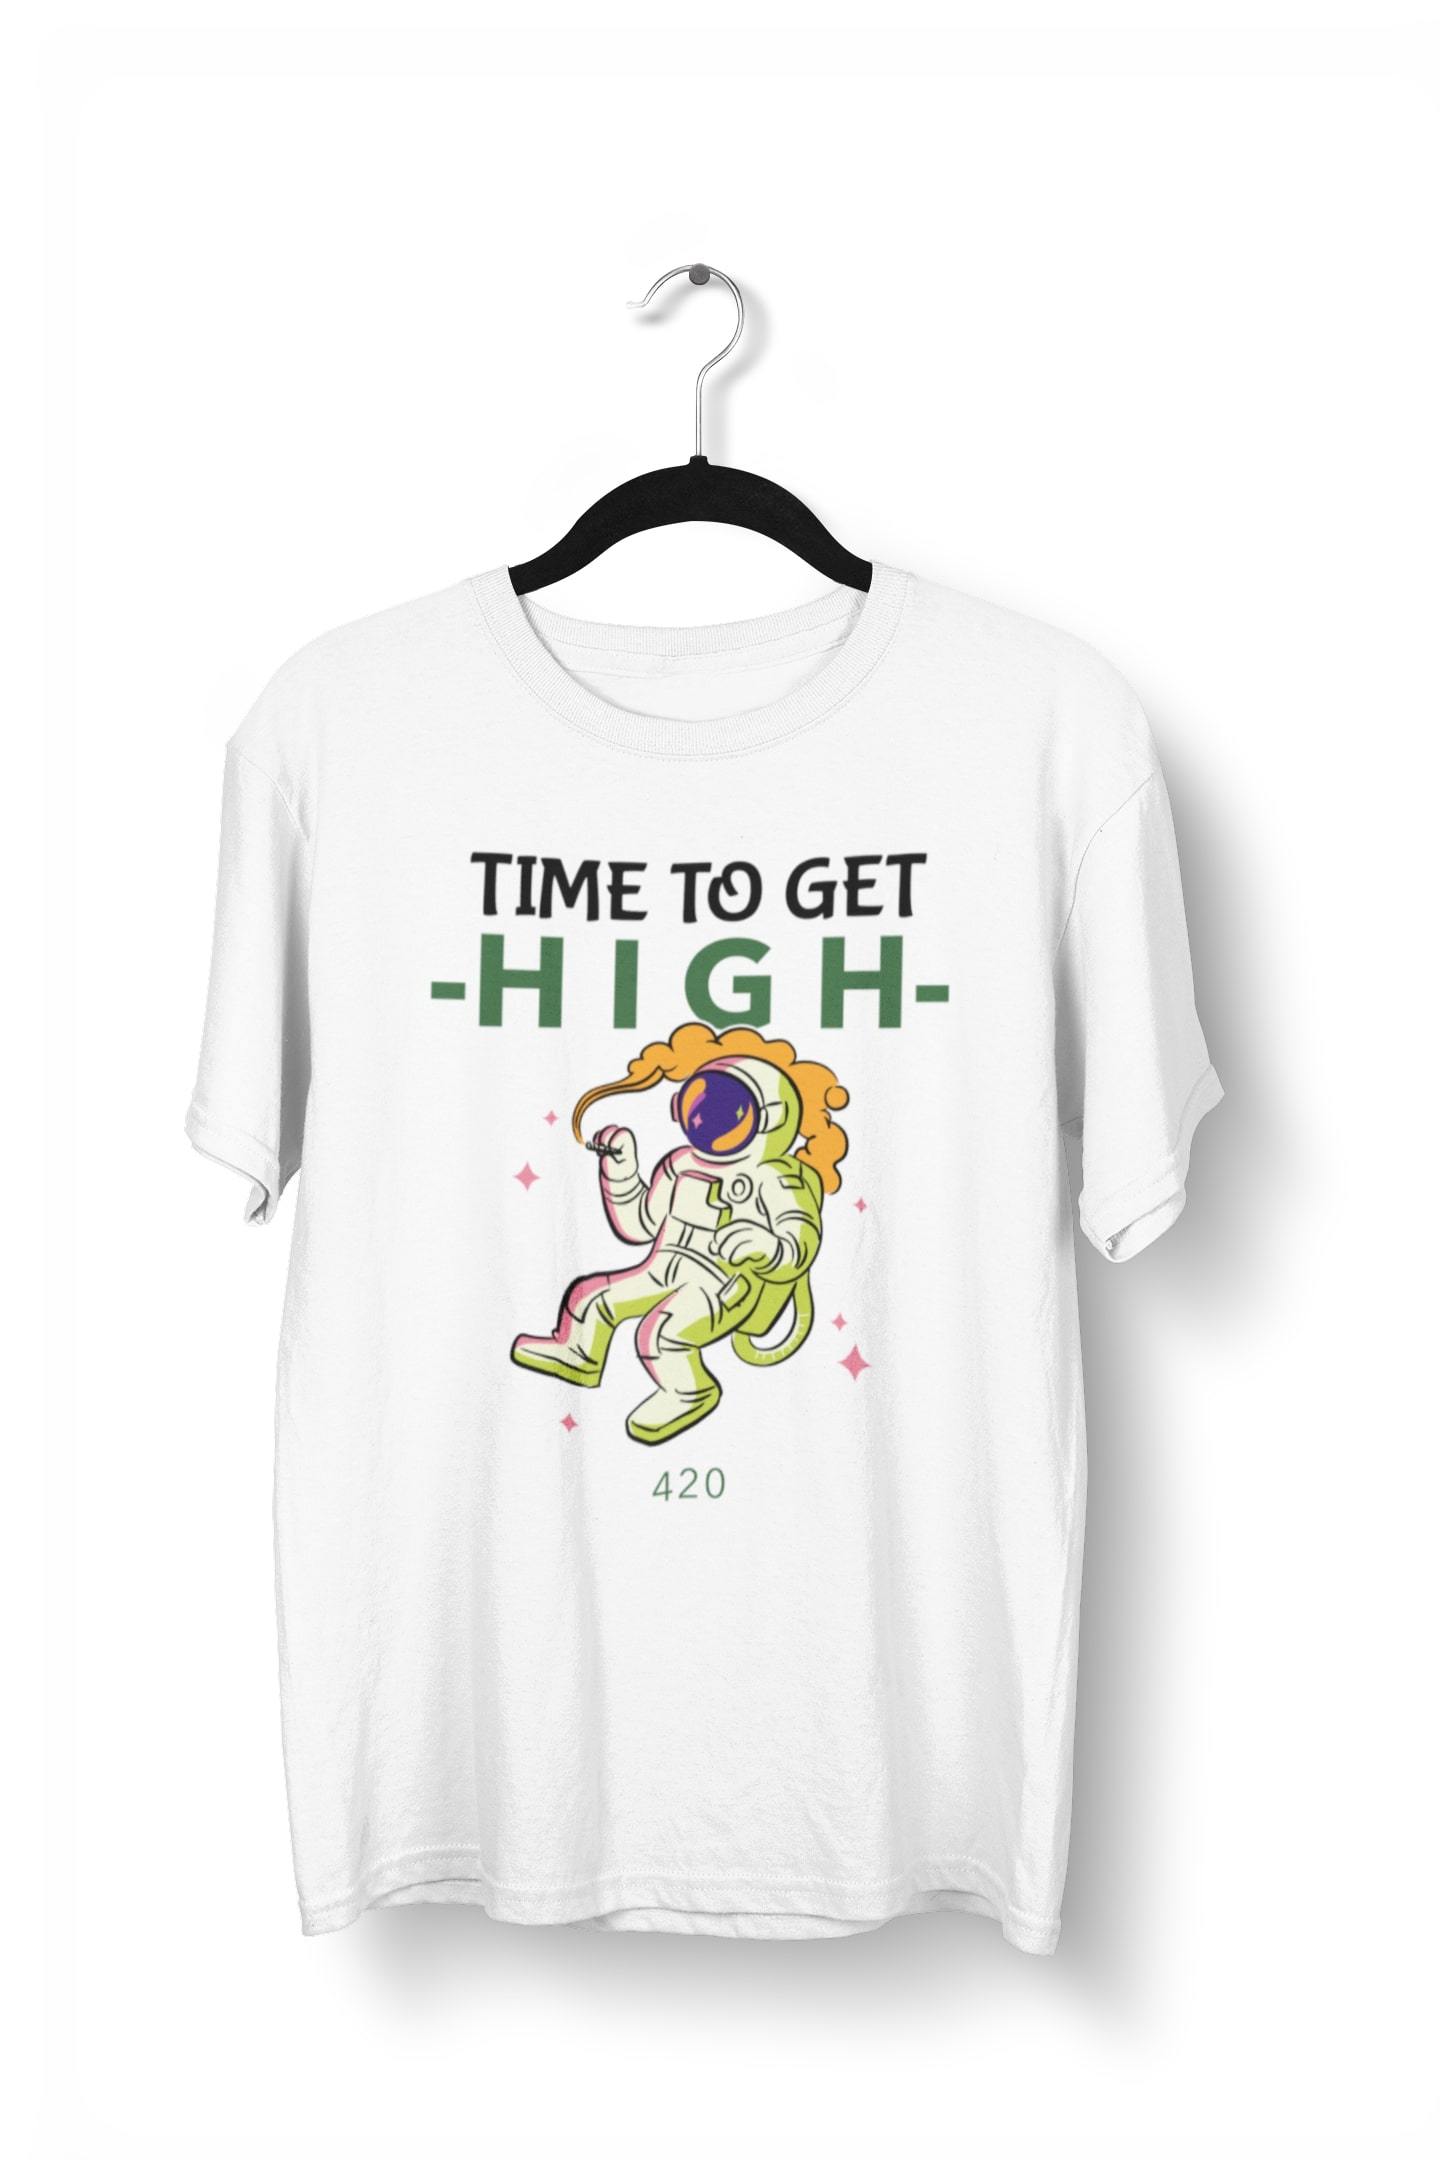 Time to get High T-Shirt for Men - Insane Tees